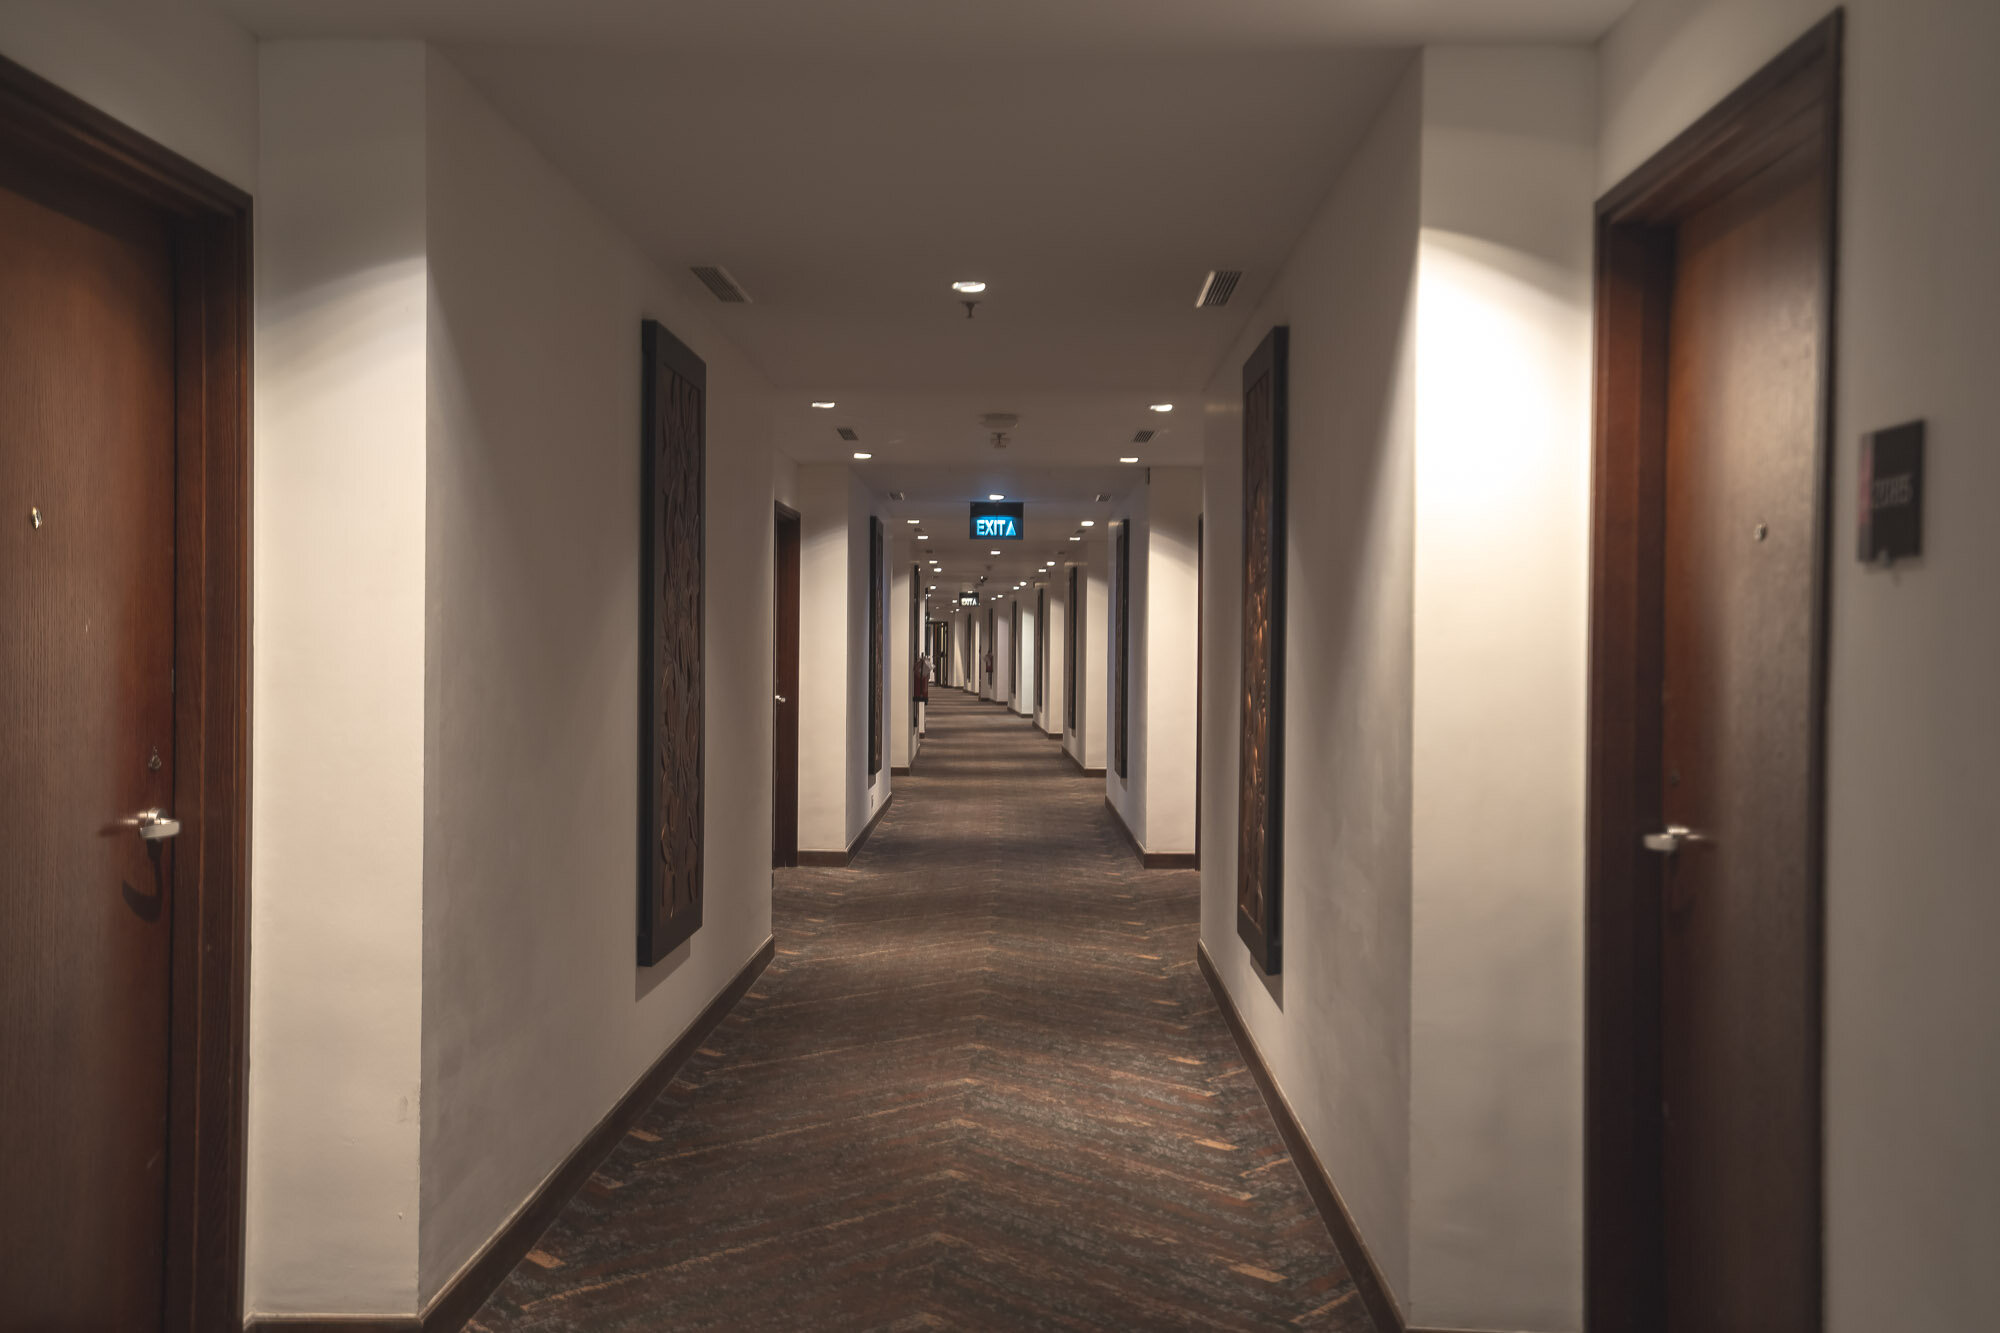 The corridor is very clean and shows the curvature of the building